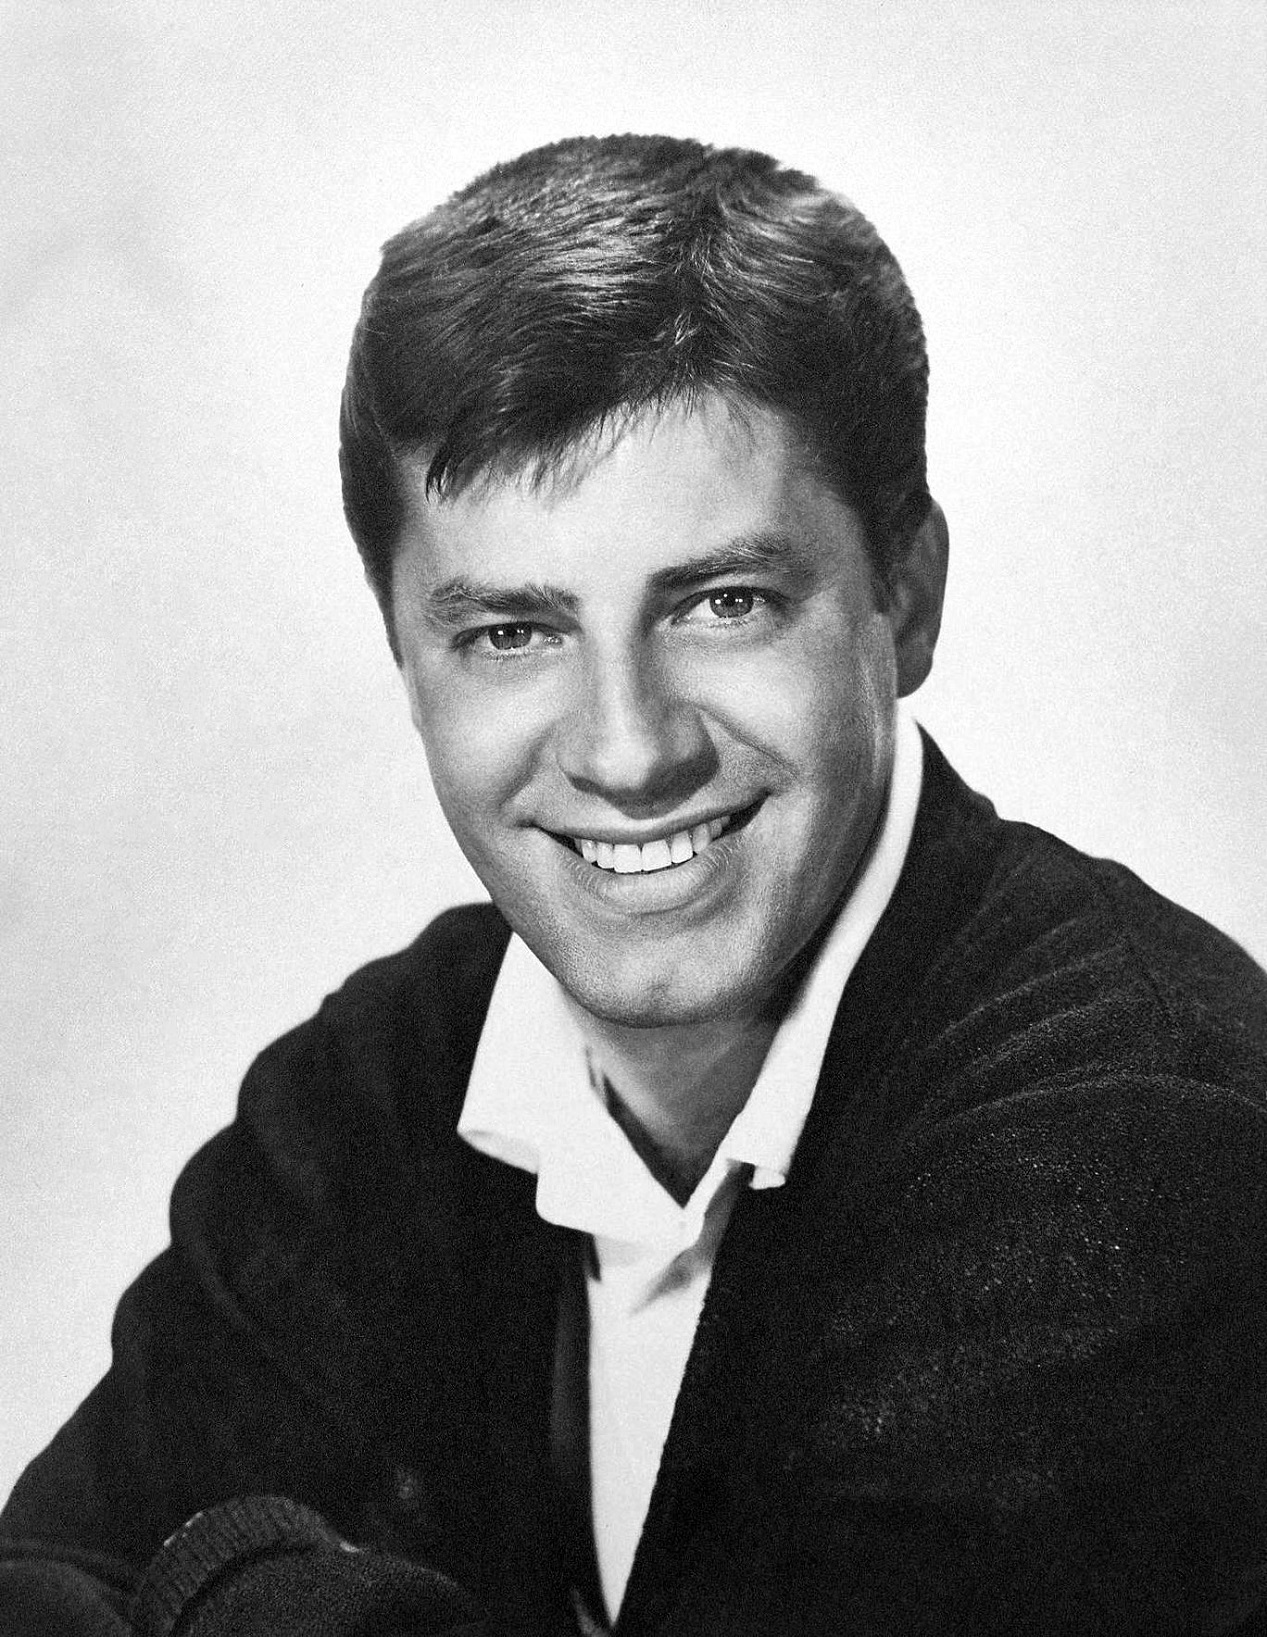 jerry lewis paramount photo by bud fraker 1957 - Vintage